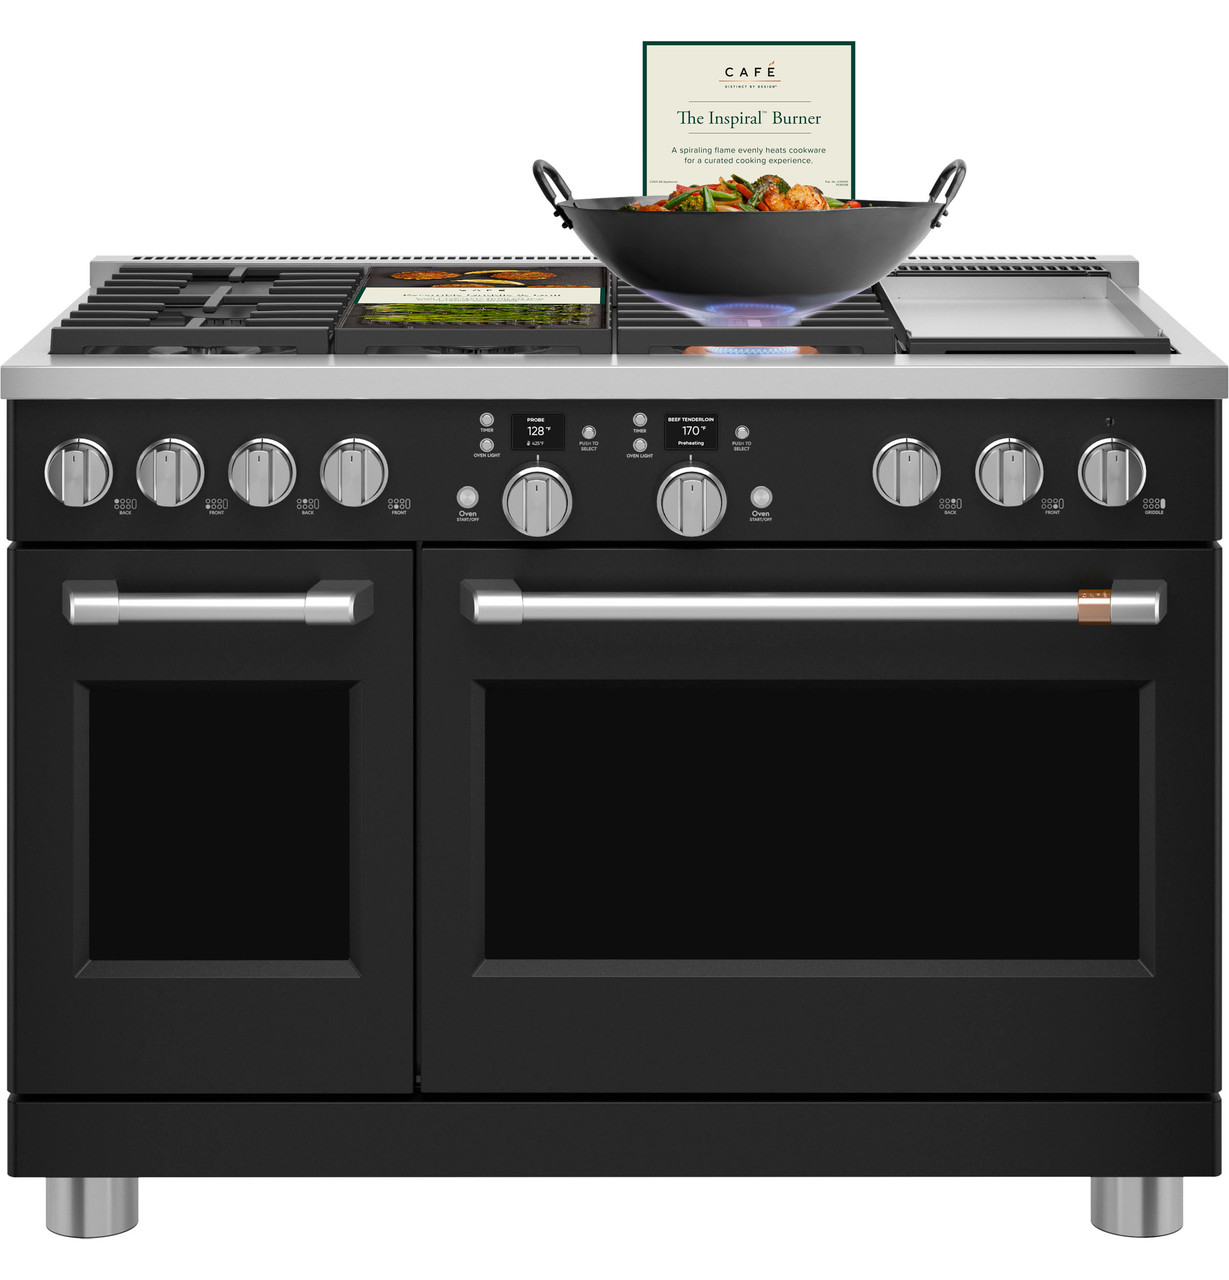 Precision 6 burner range with 24 griddle and double oven